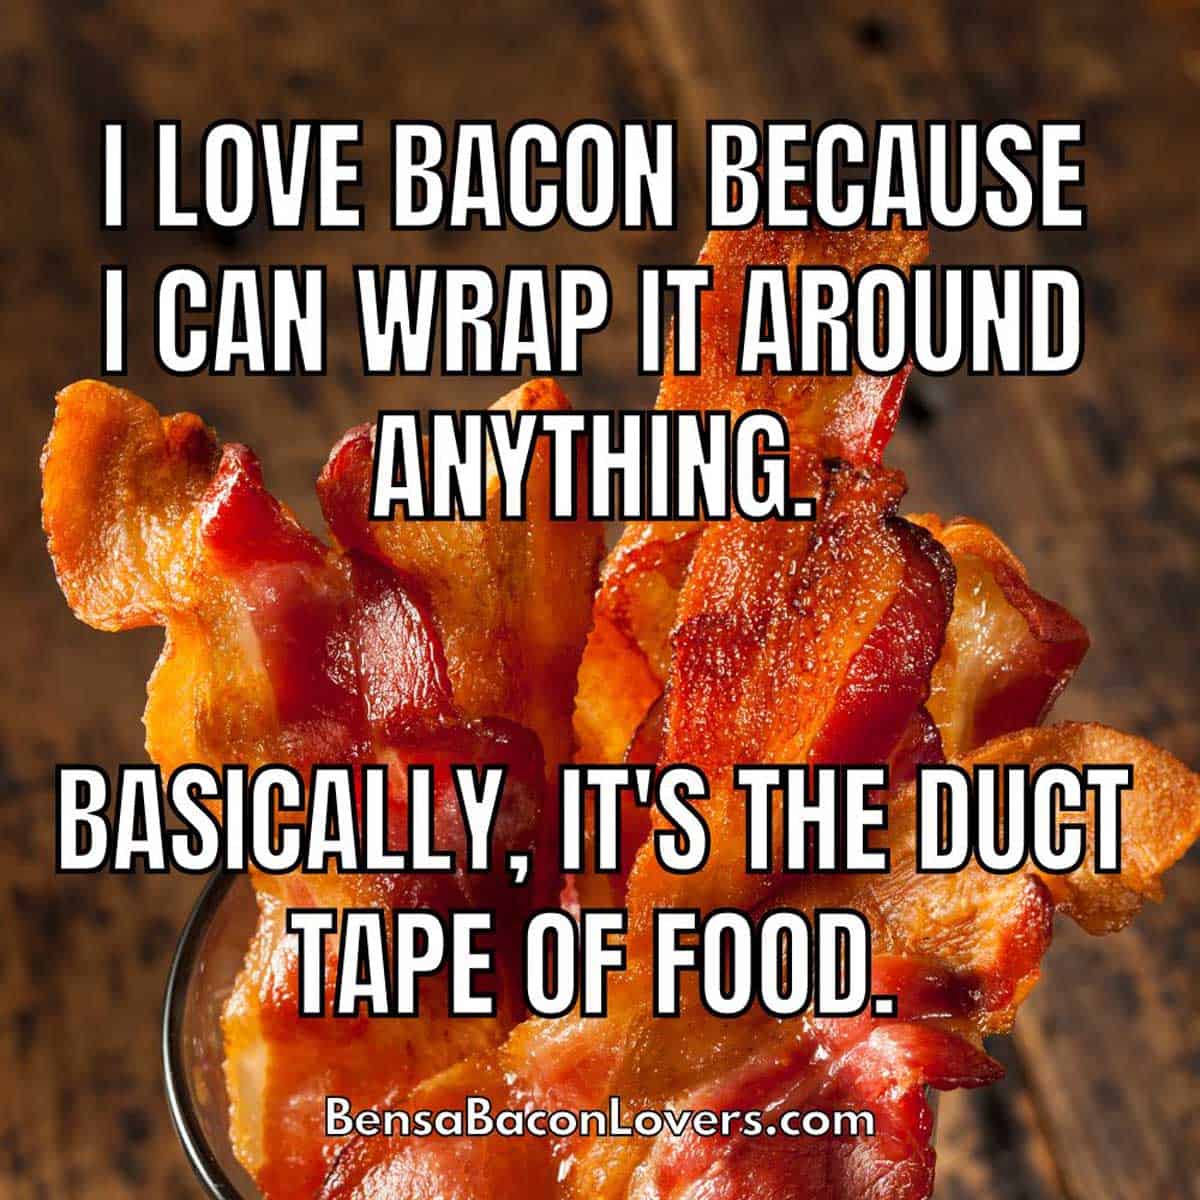 Meme with crispy cooked bacon and text: I love bacon because I can wrap it around anything. Basically, it's the duct tape of food.